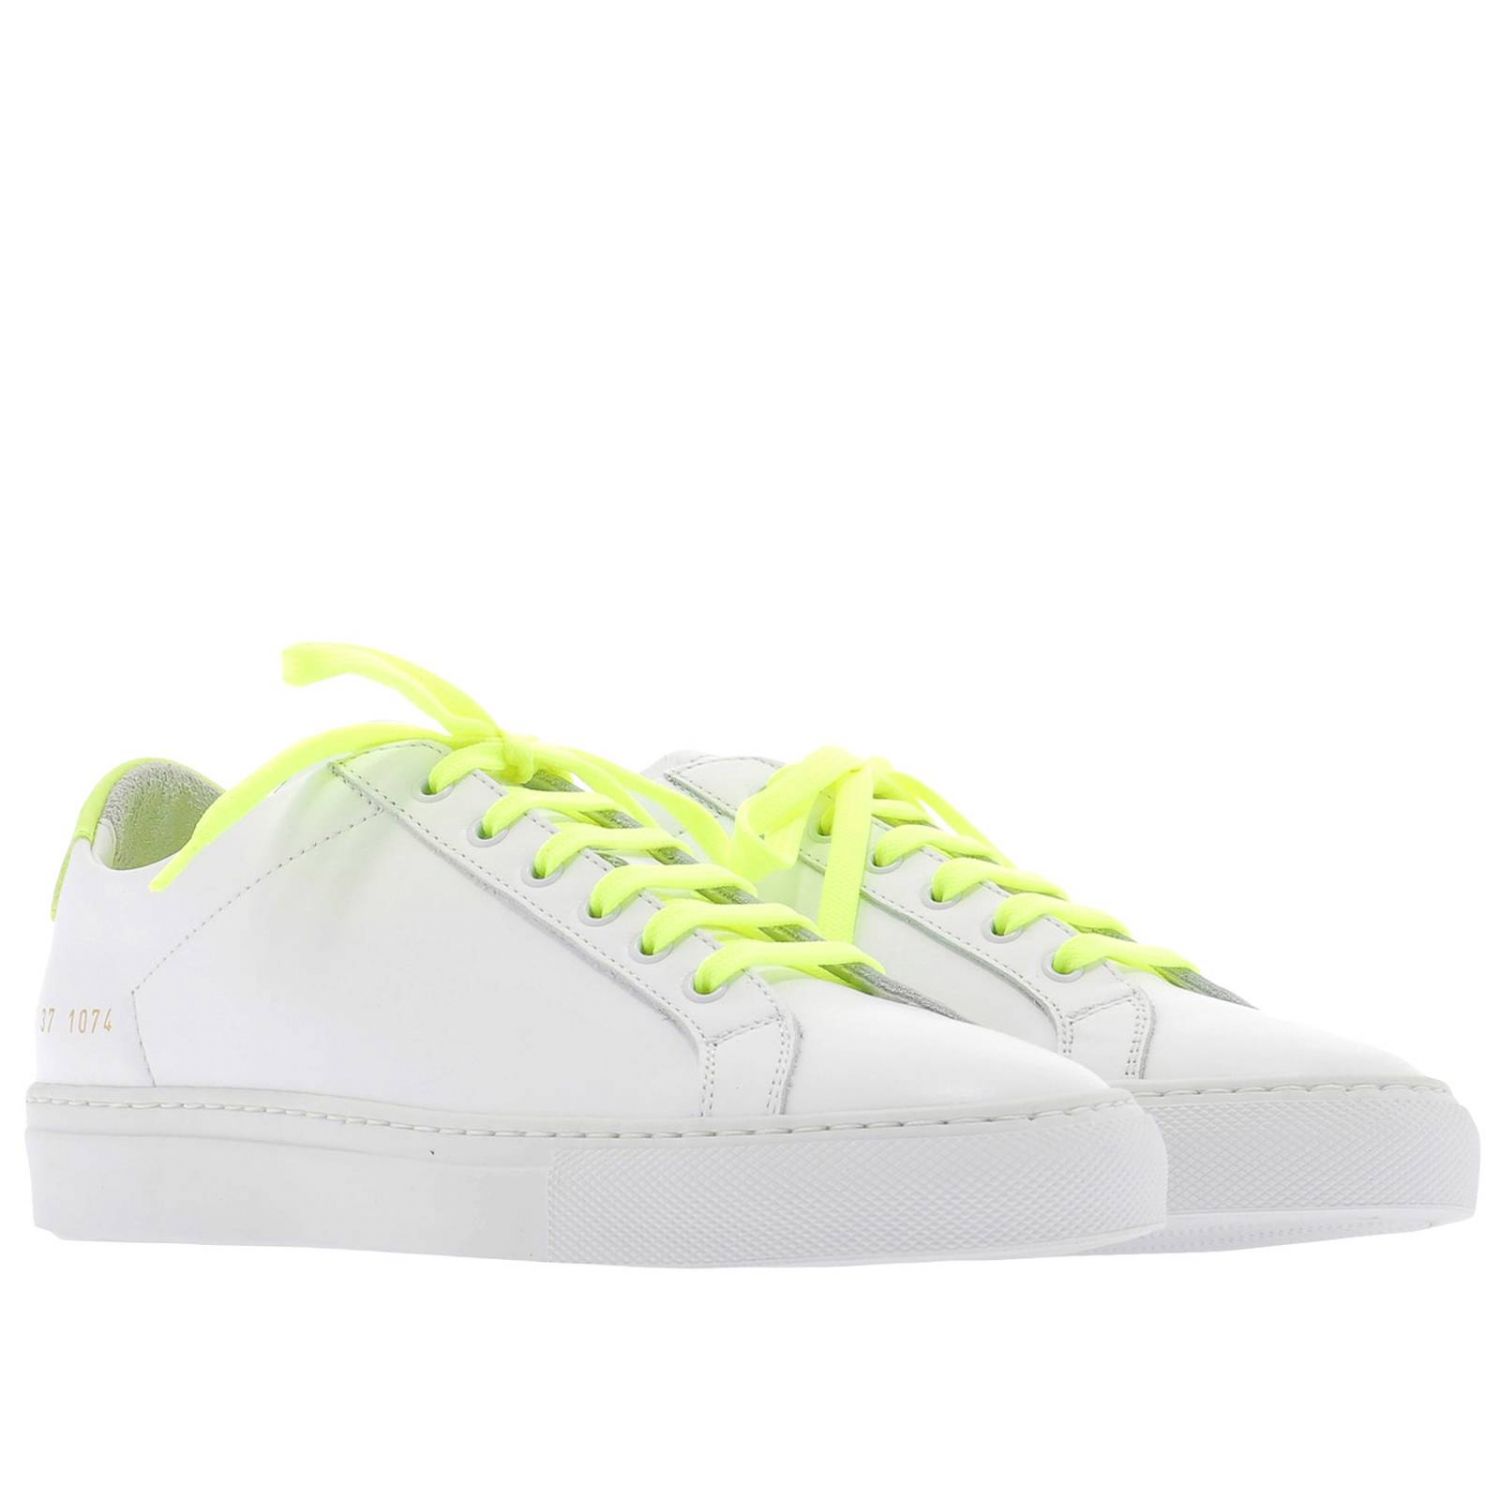 Common Projects Outlet: sneakers for woman - Yellow | Common Projects ...